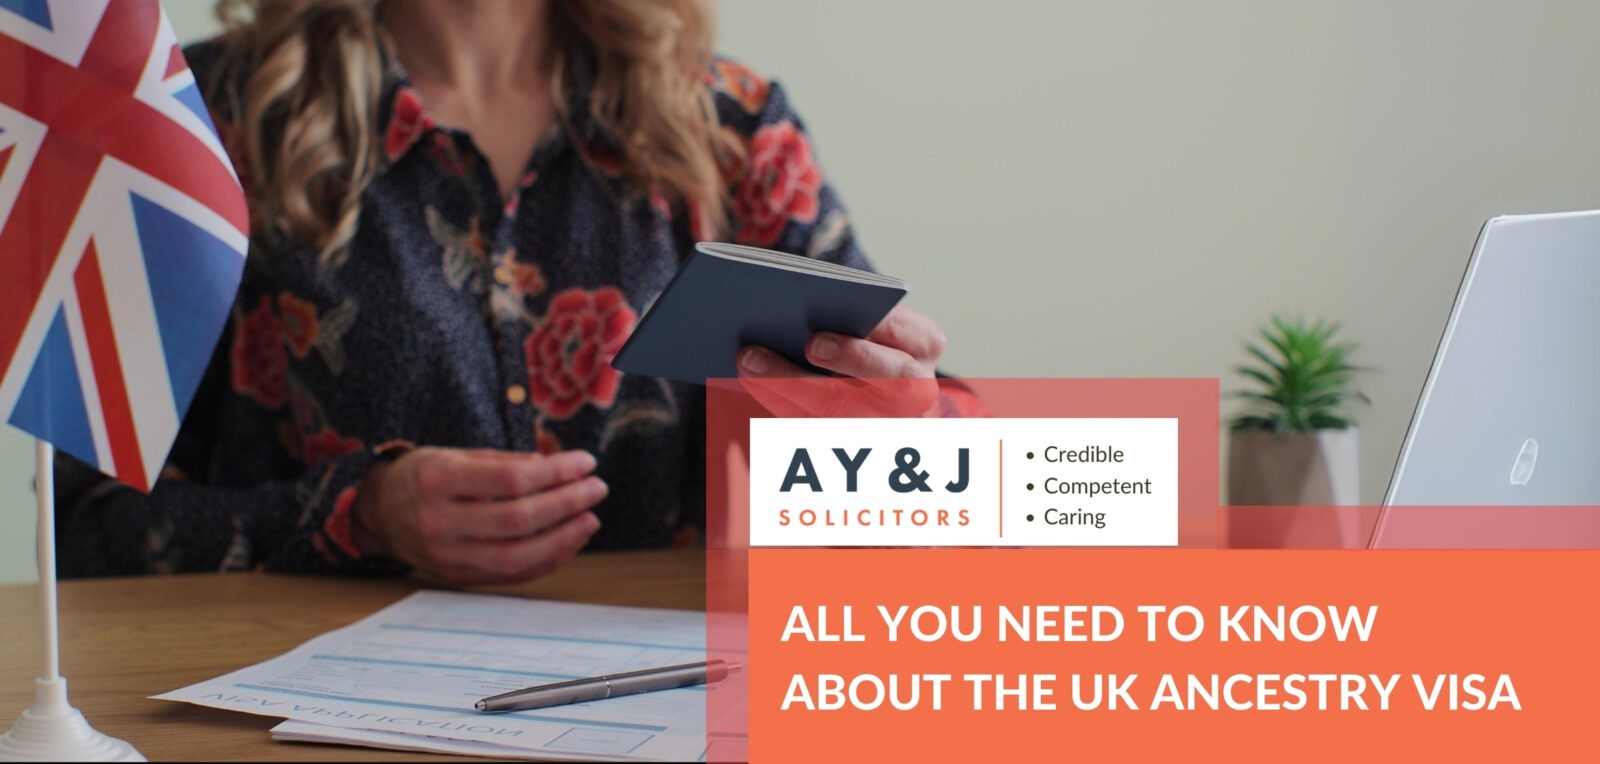 All You Need To Know About The UK Ancestry Visa